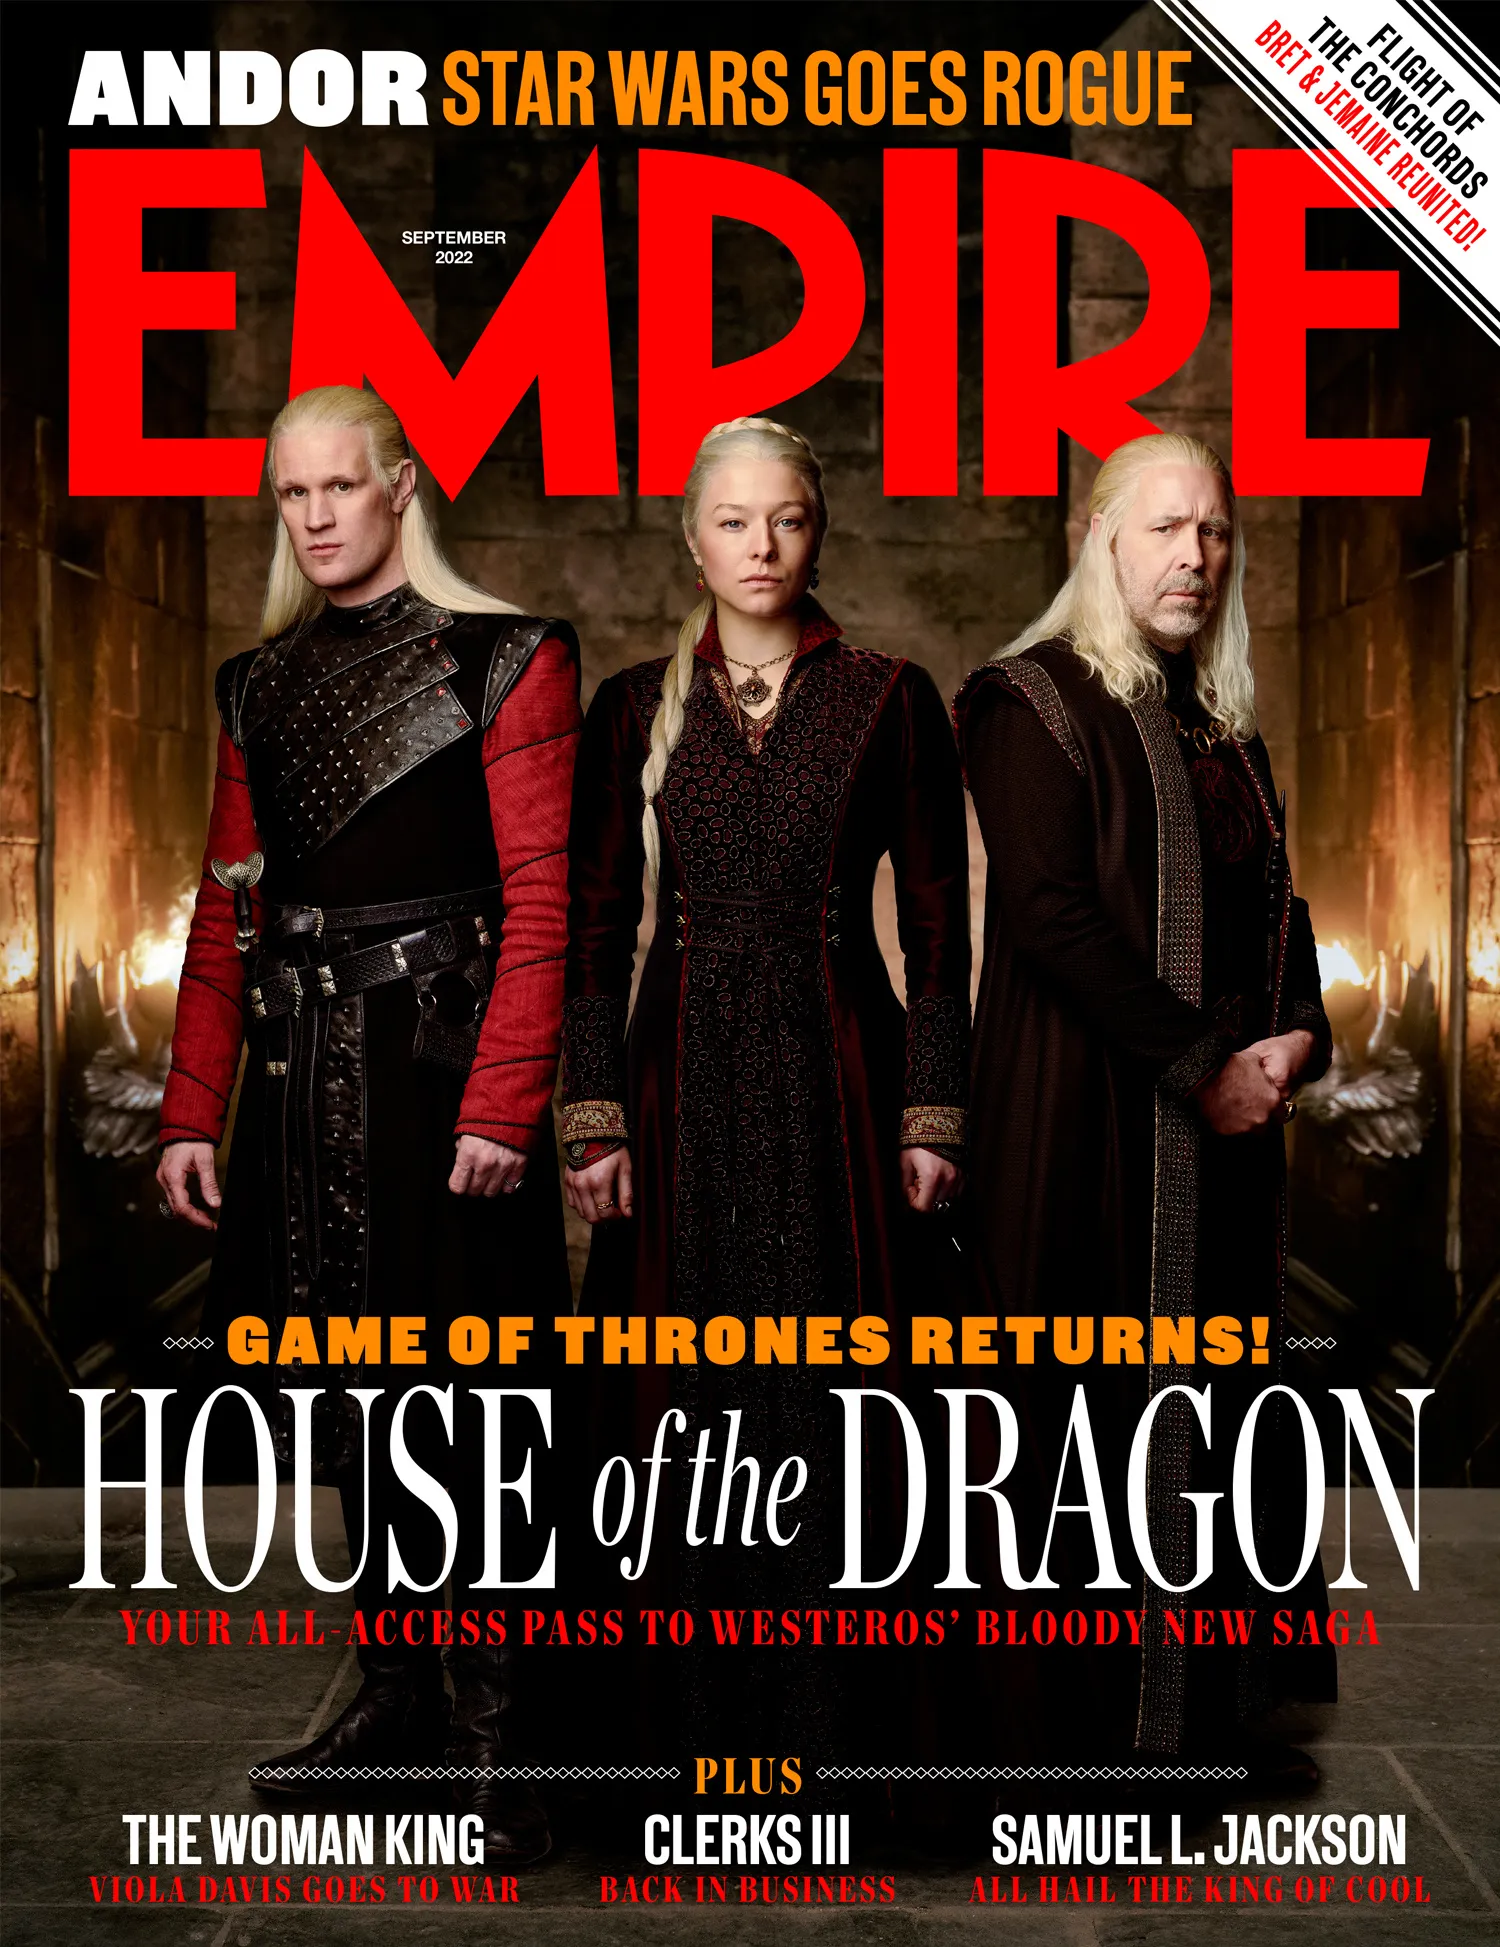 'House of the Dragon' on the cover of 'Empire' September issue | FMV6